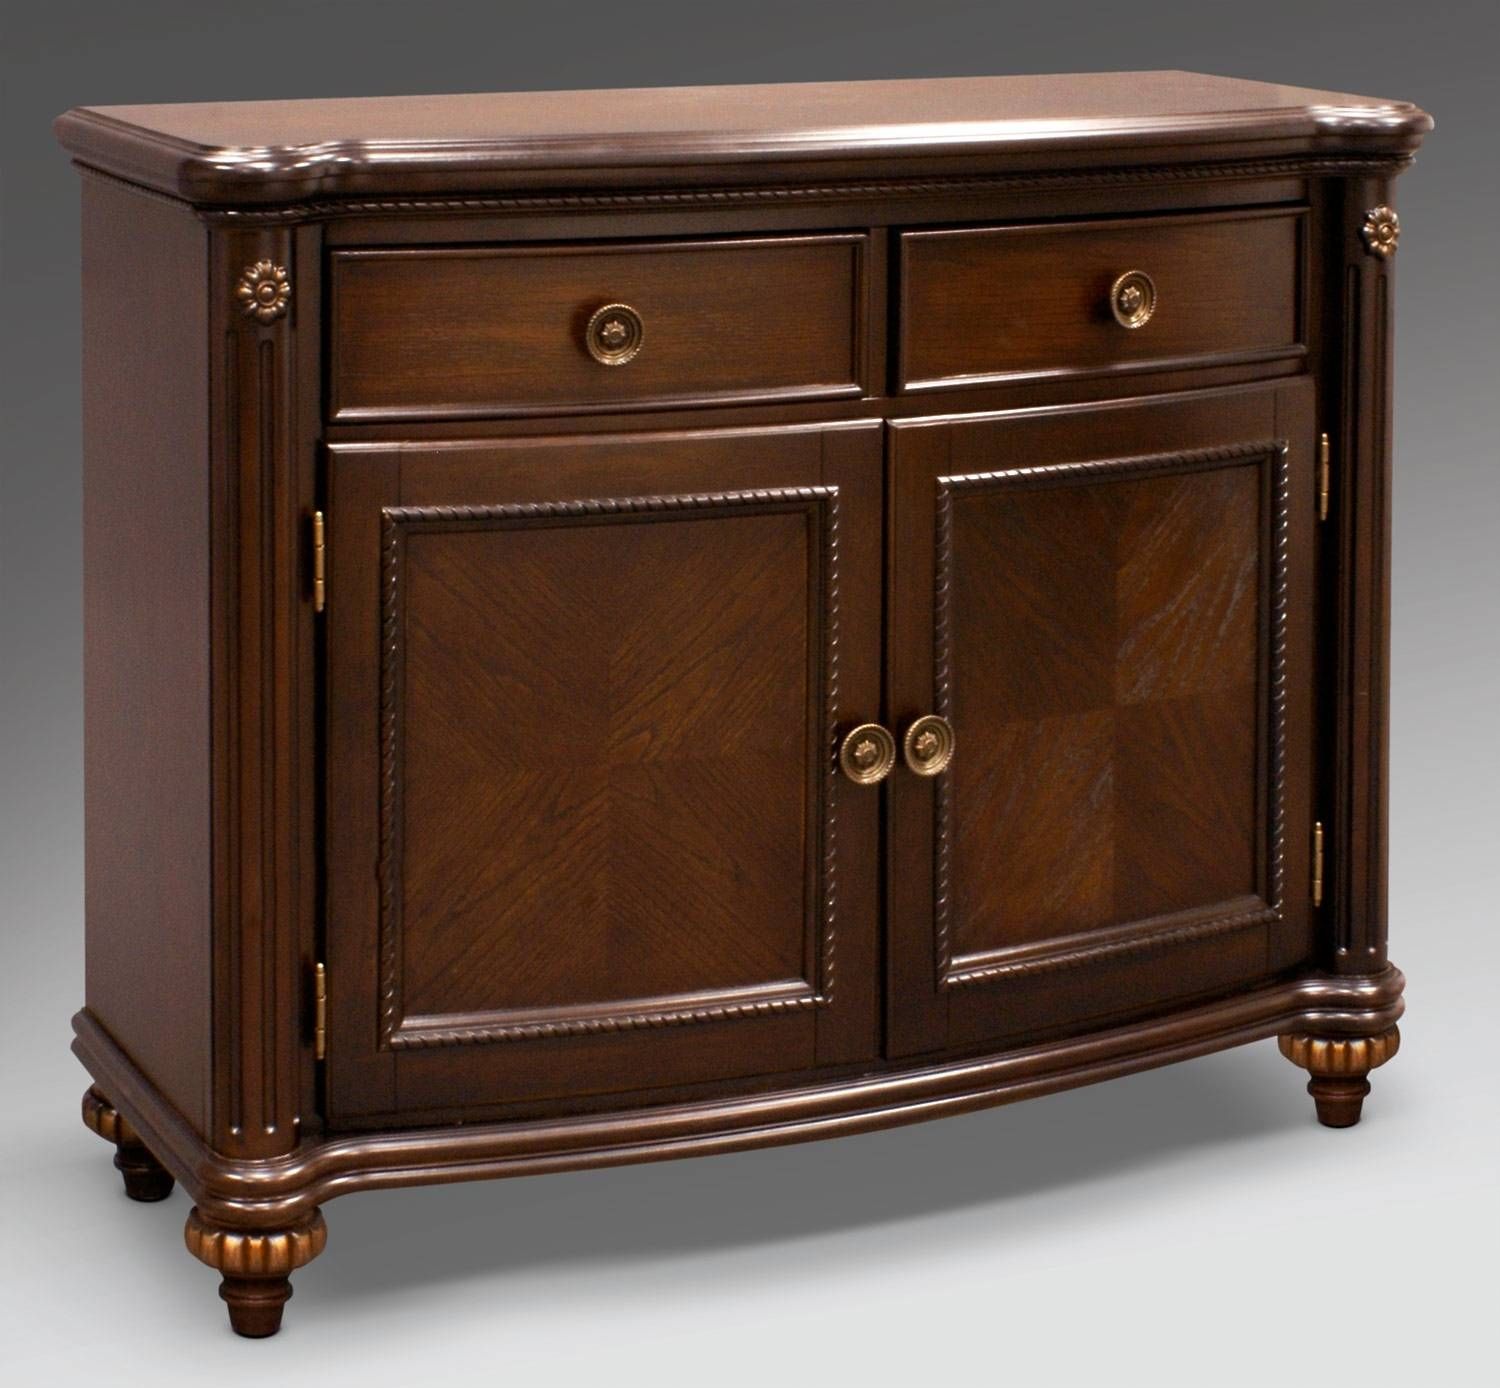 Dining Room Servers Buffet Furniture Pictures Cabinet Trends And For Buffet Sideboard Servers (View 9 of 15)